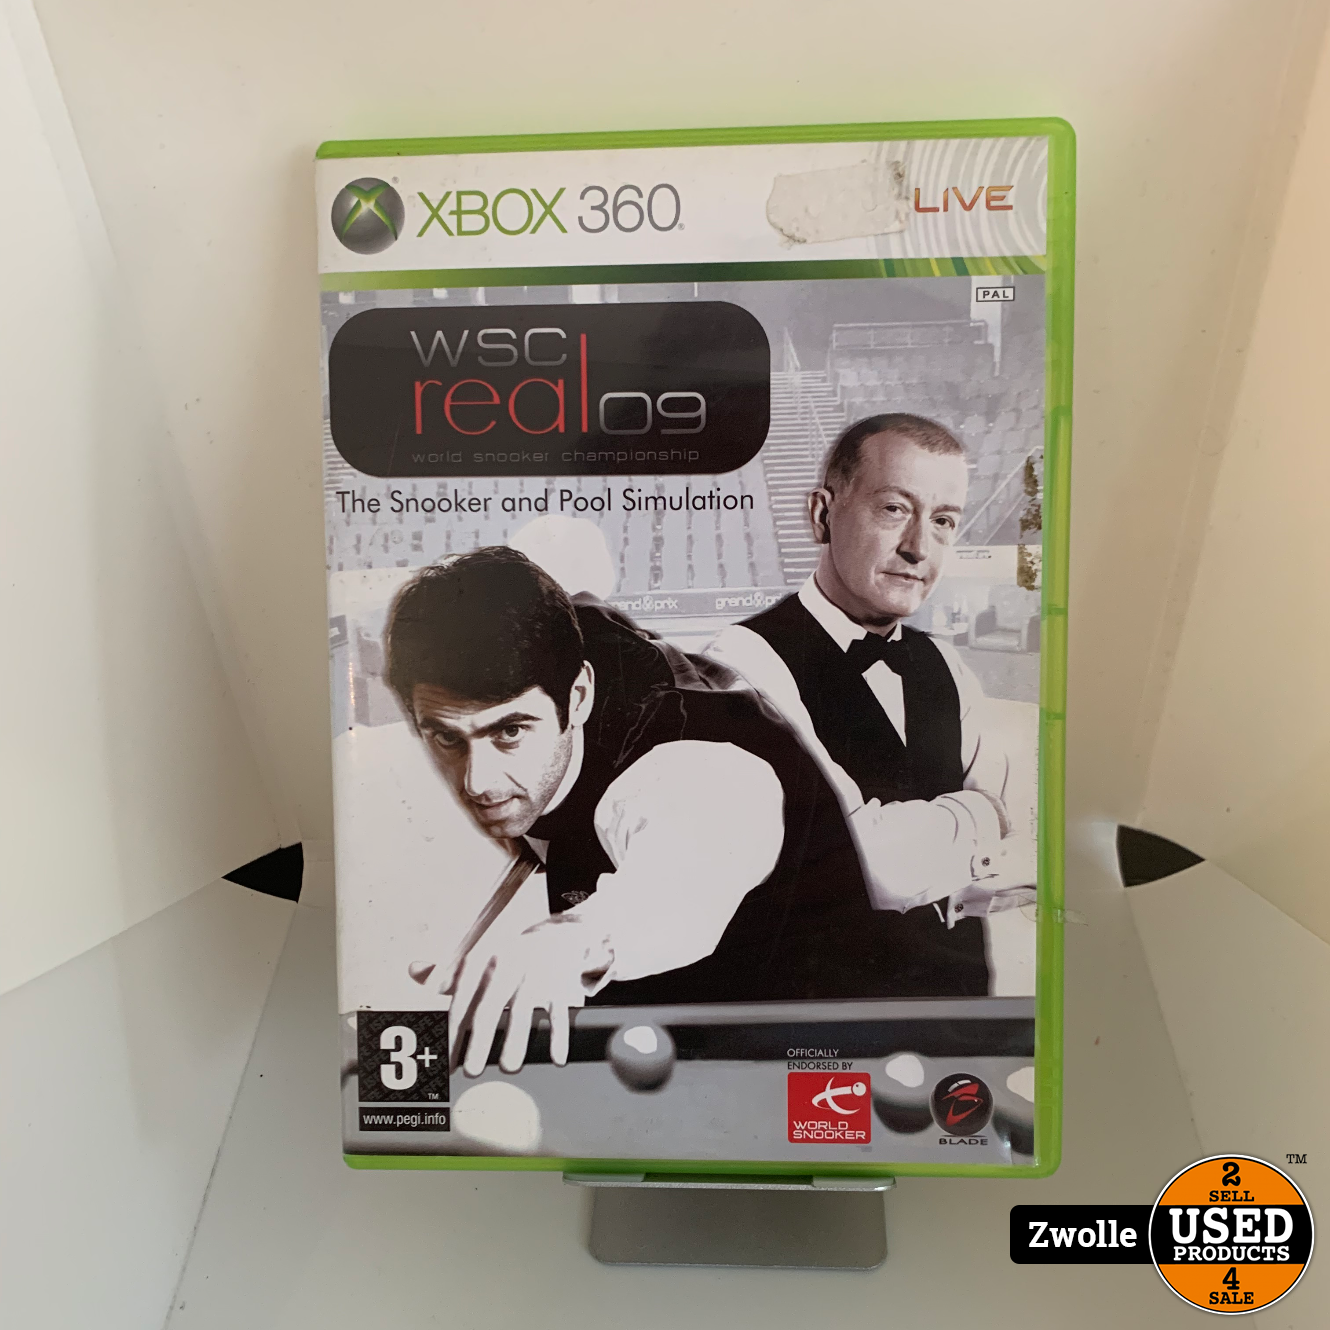 Frons Detective riem Xbox 360 game wsc real 09 - Used Products Zwolle